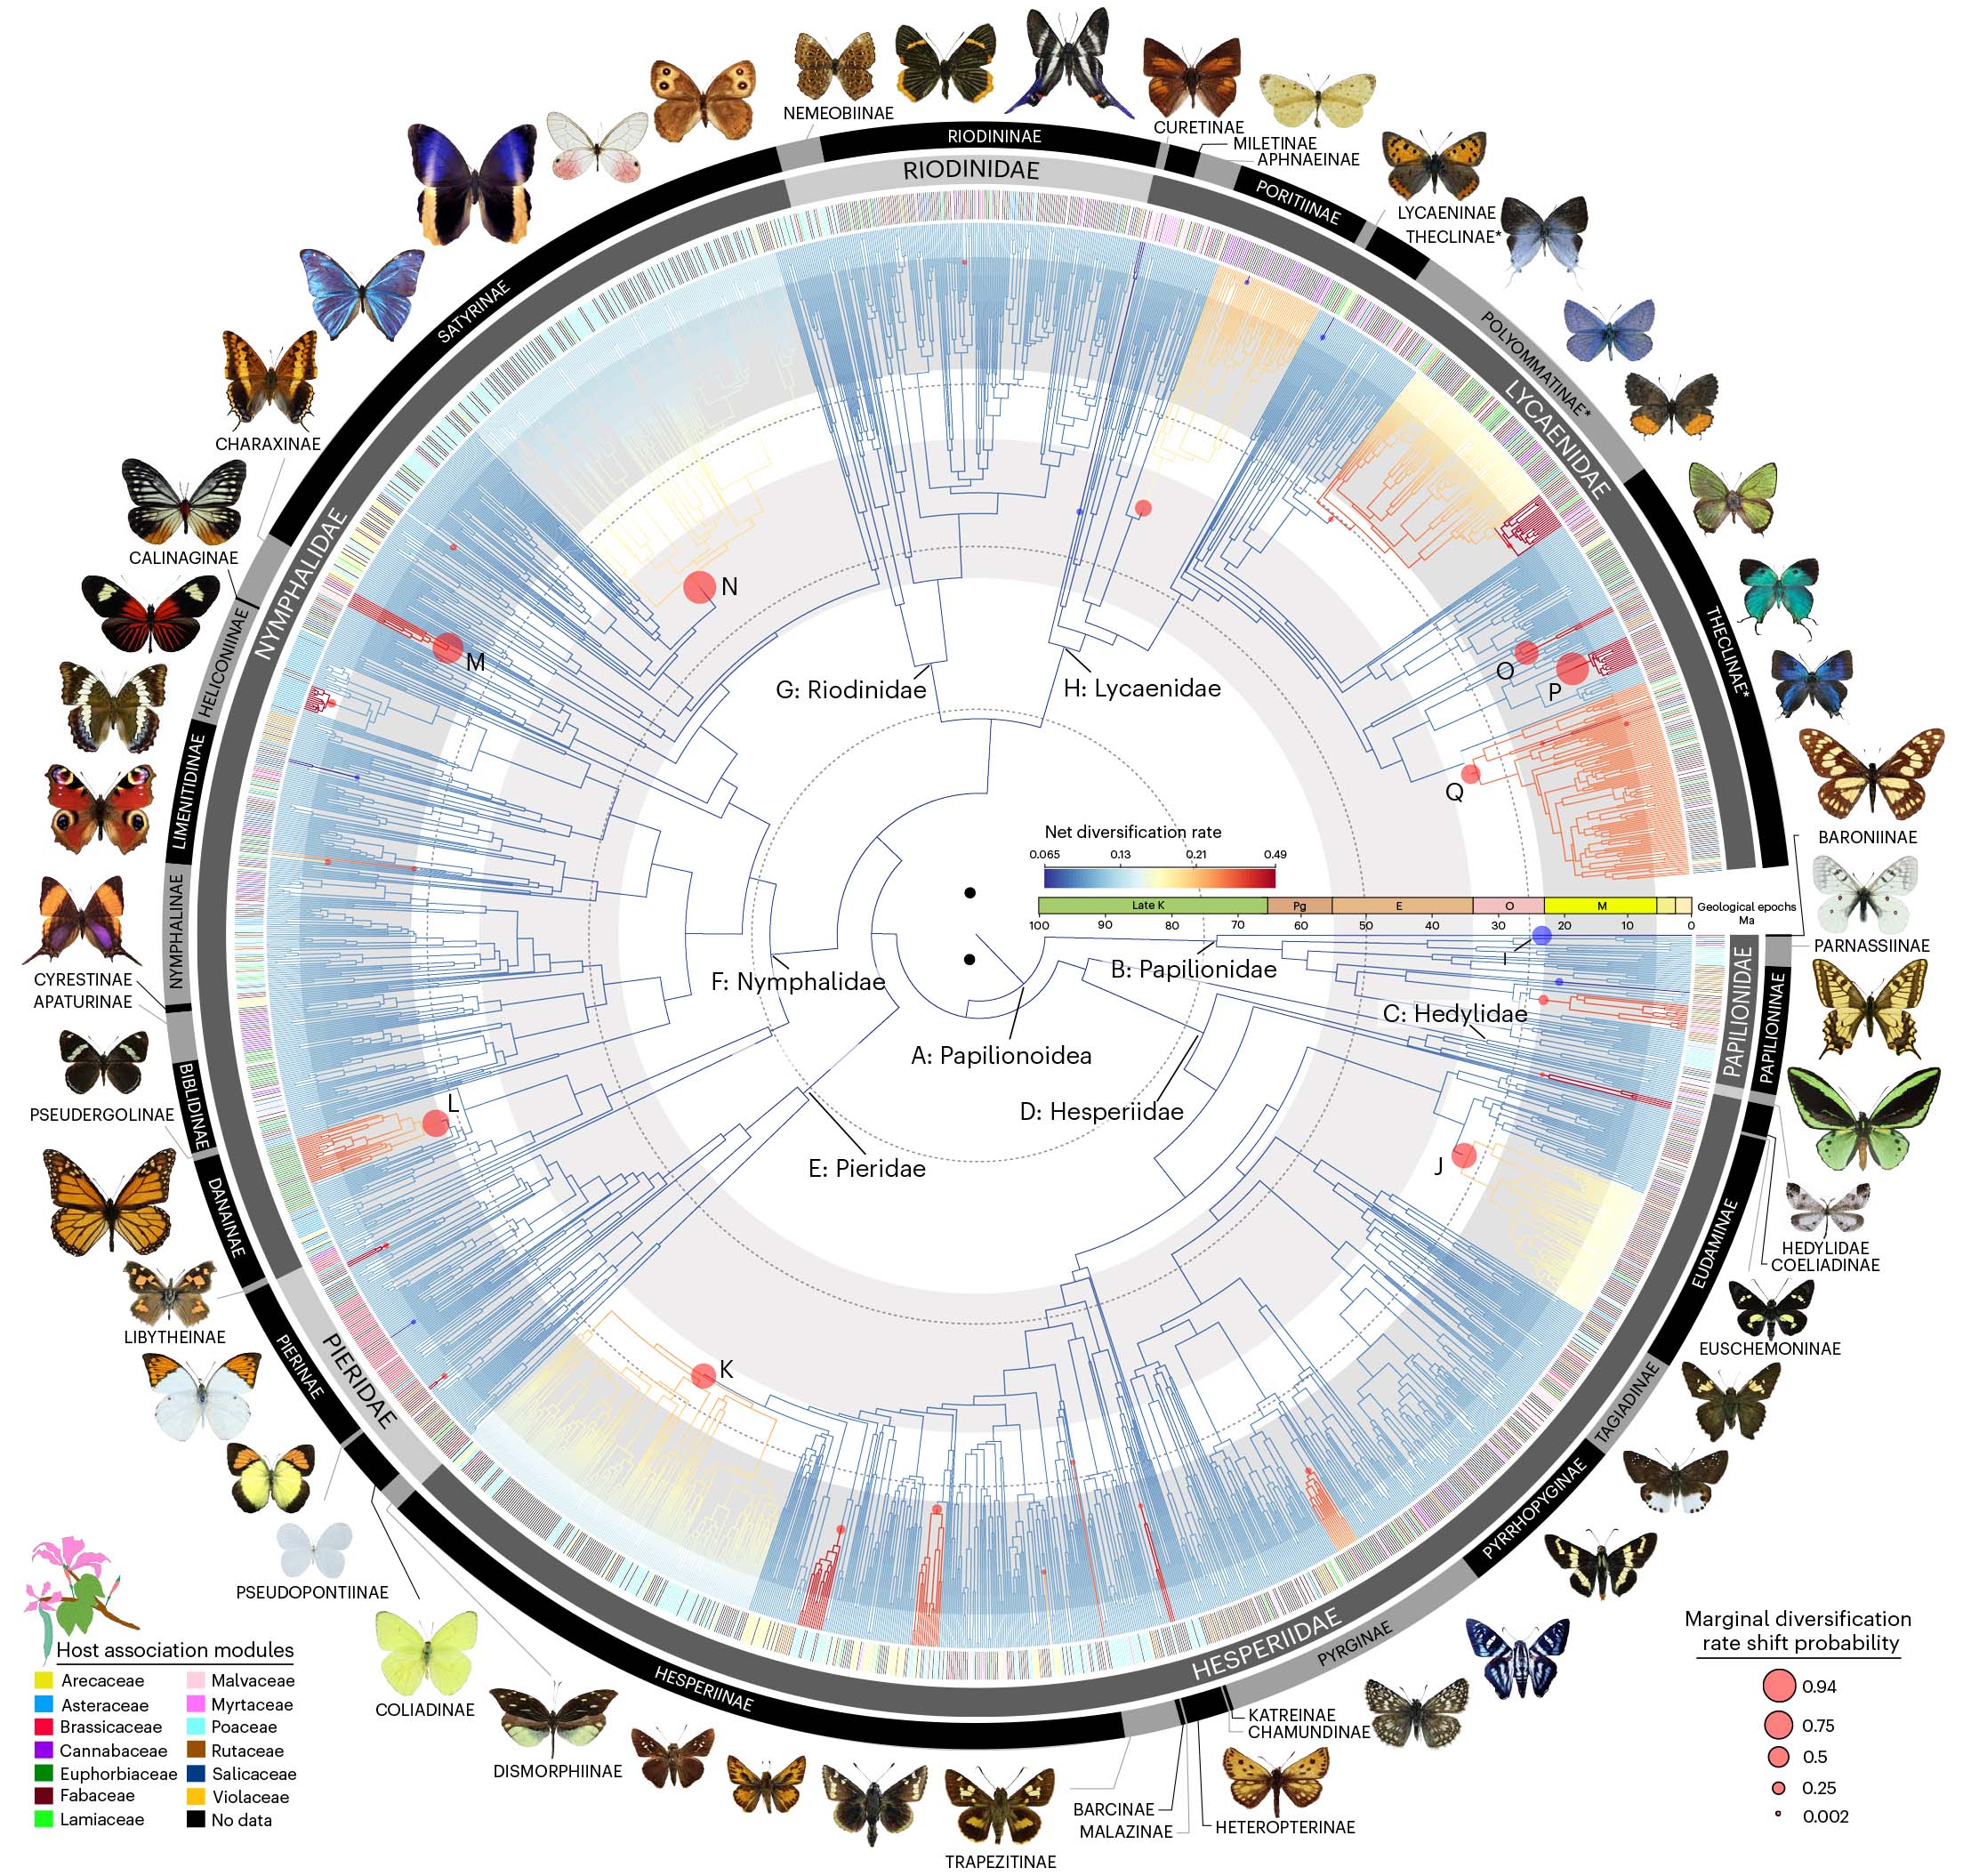 circular chart shows diversification among butterfly species